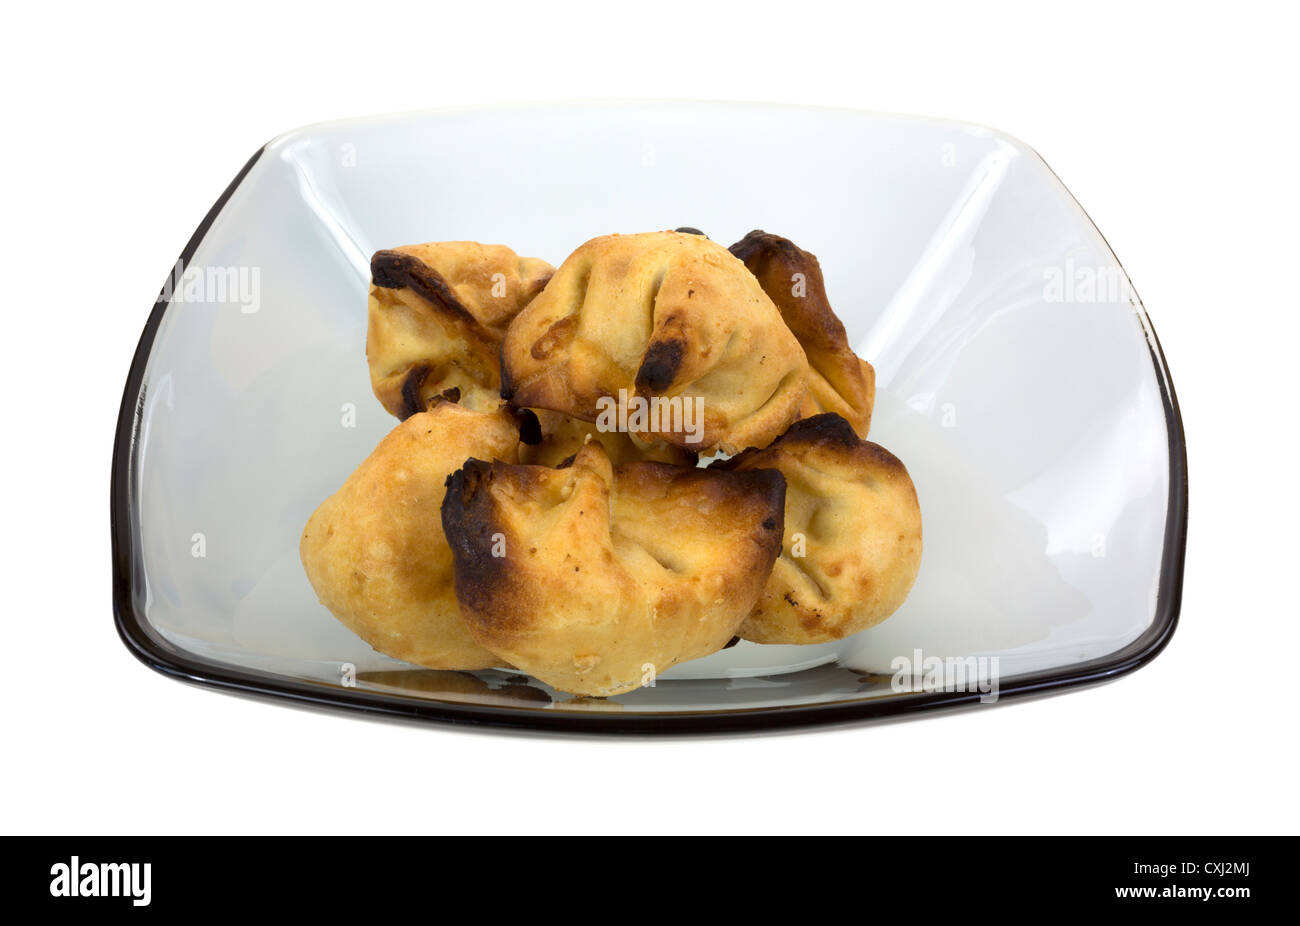 Several overly cooked crab Rangoon's in a translucent dish on a white background. Stock Photo